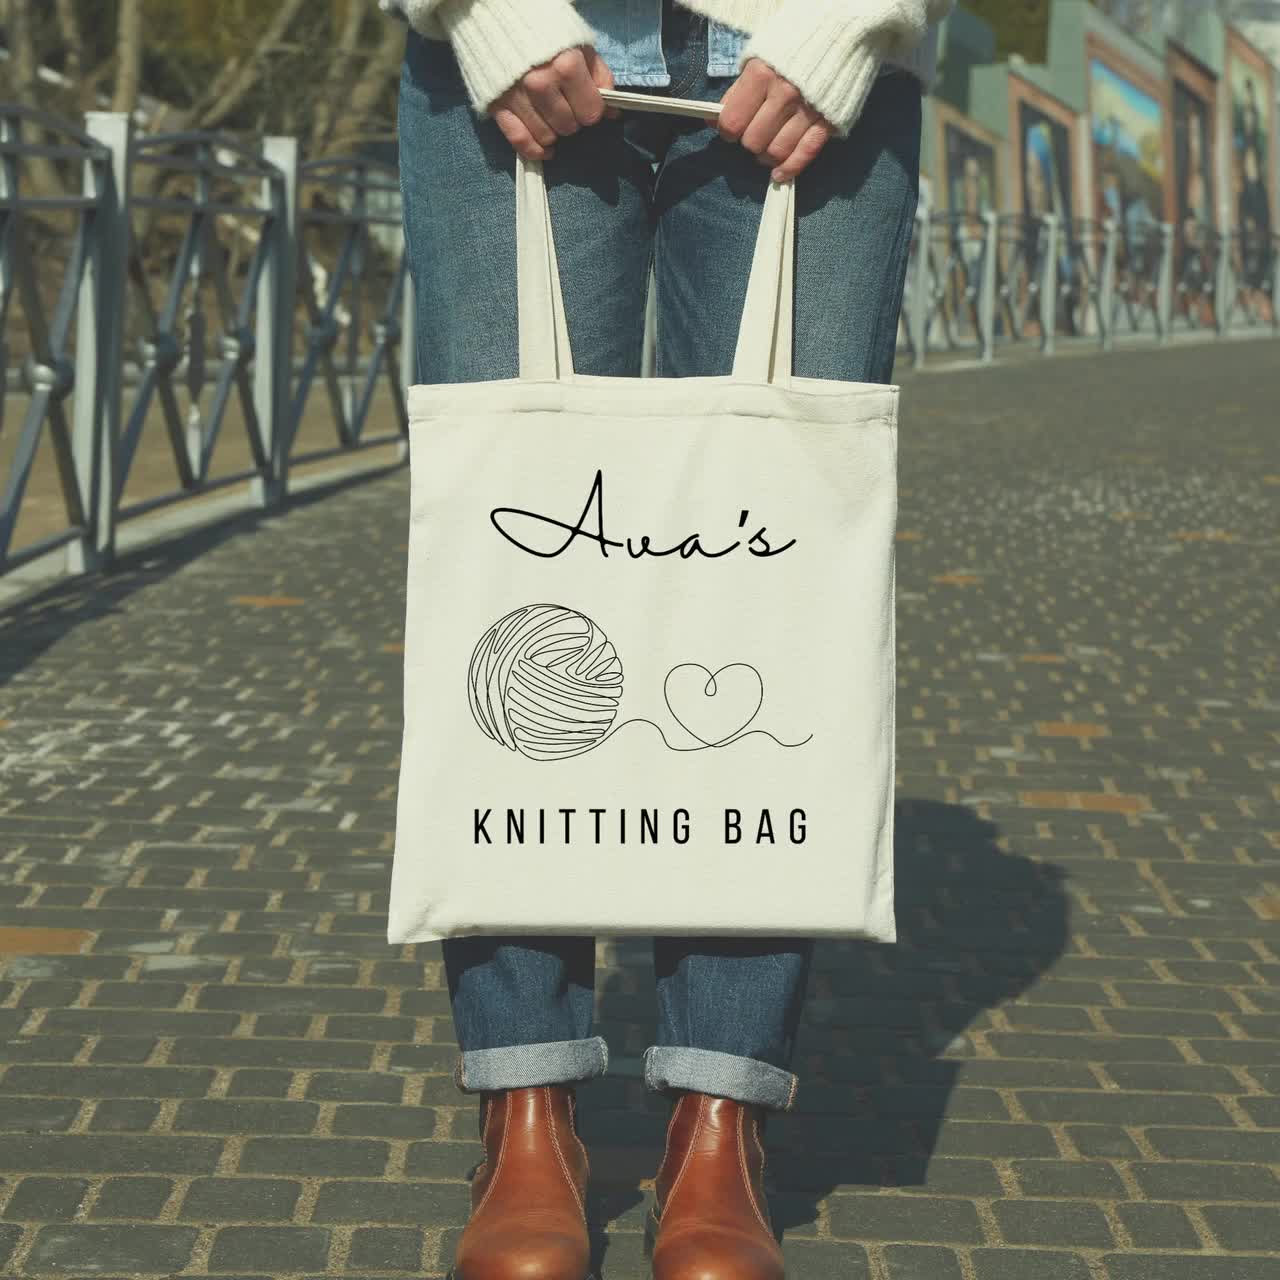 Personalized Knitting Tote Bag Custom Name Project Bag for Crochet Storage  Knitting Gift Idea for Knitter Grandma Gift Mother's Day Gift 